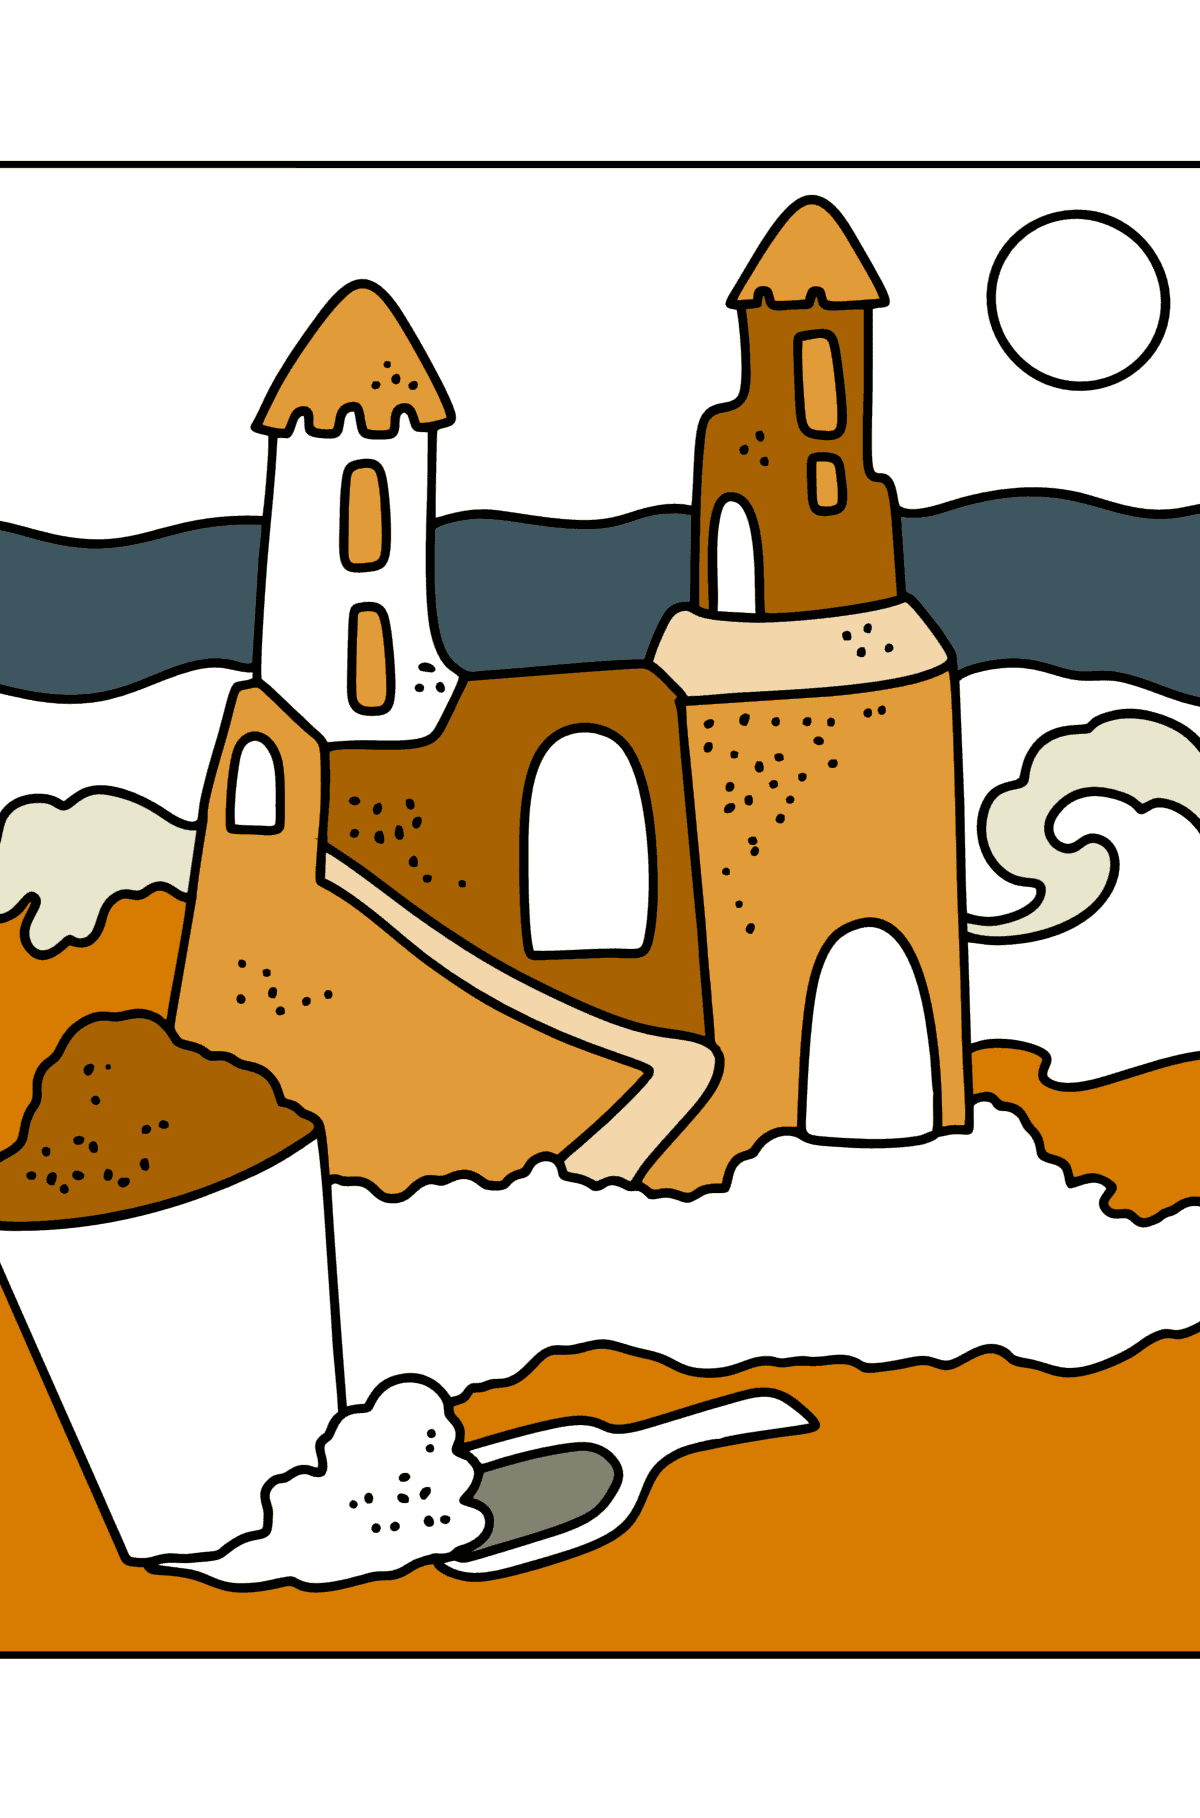 Summer Coloring page - Sandcastle - Coloring Pages for Kids